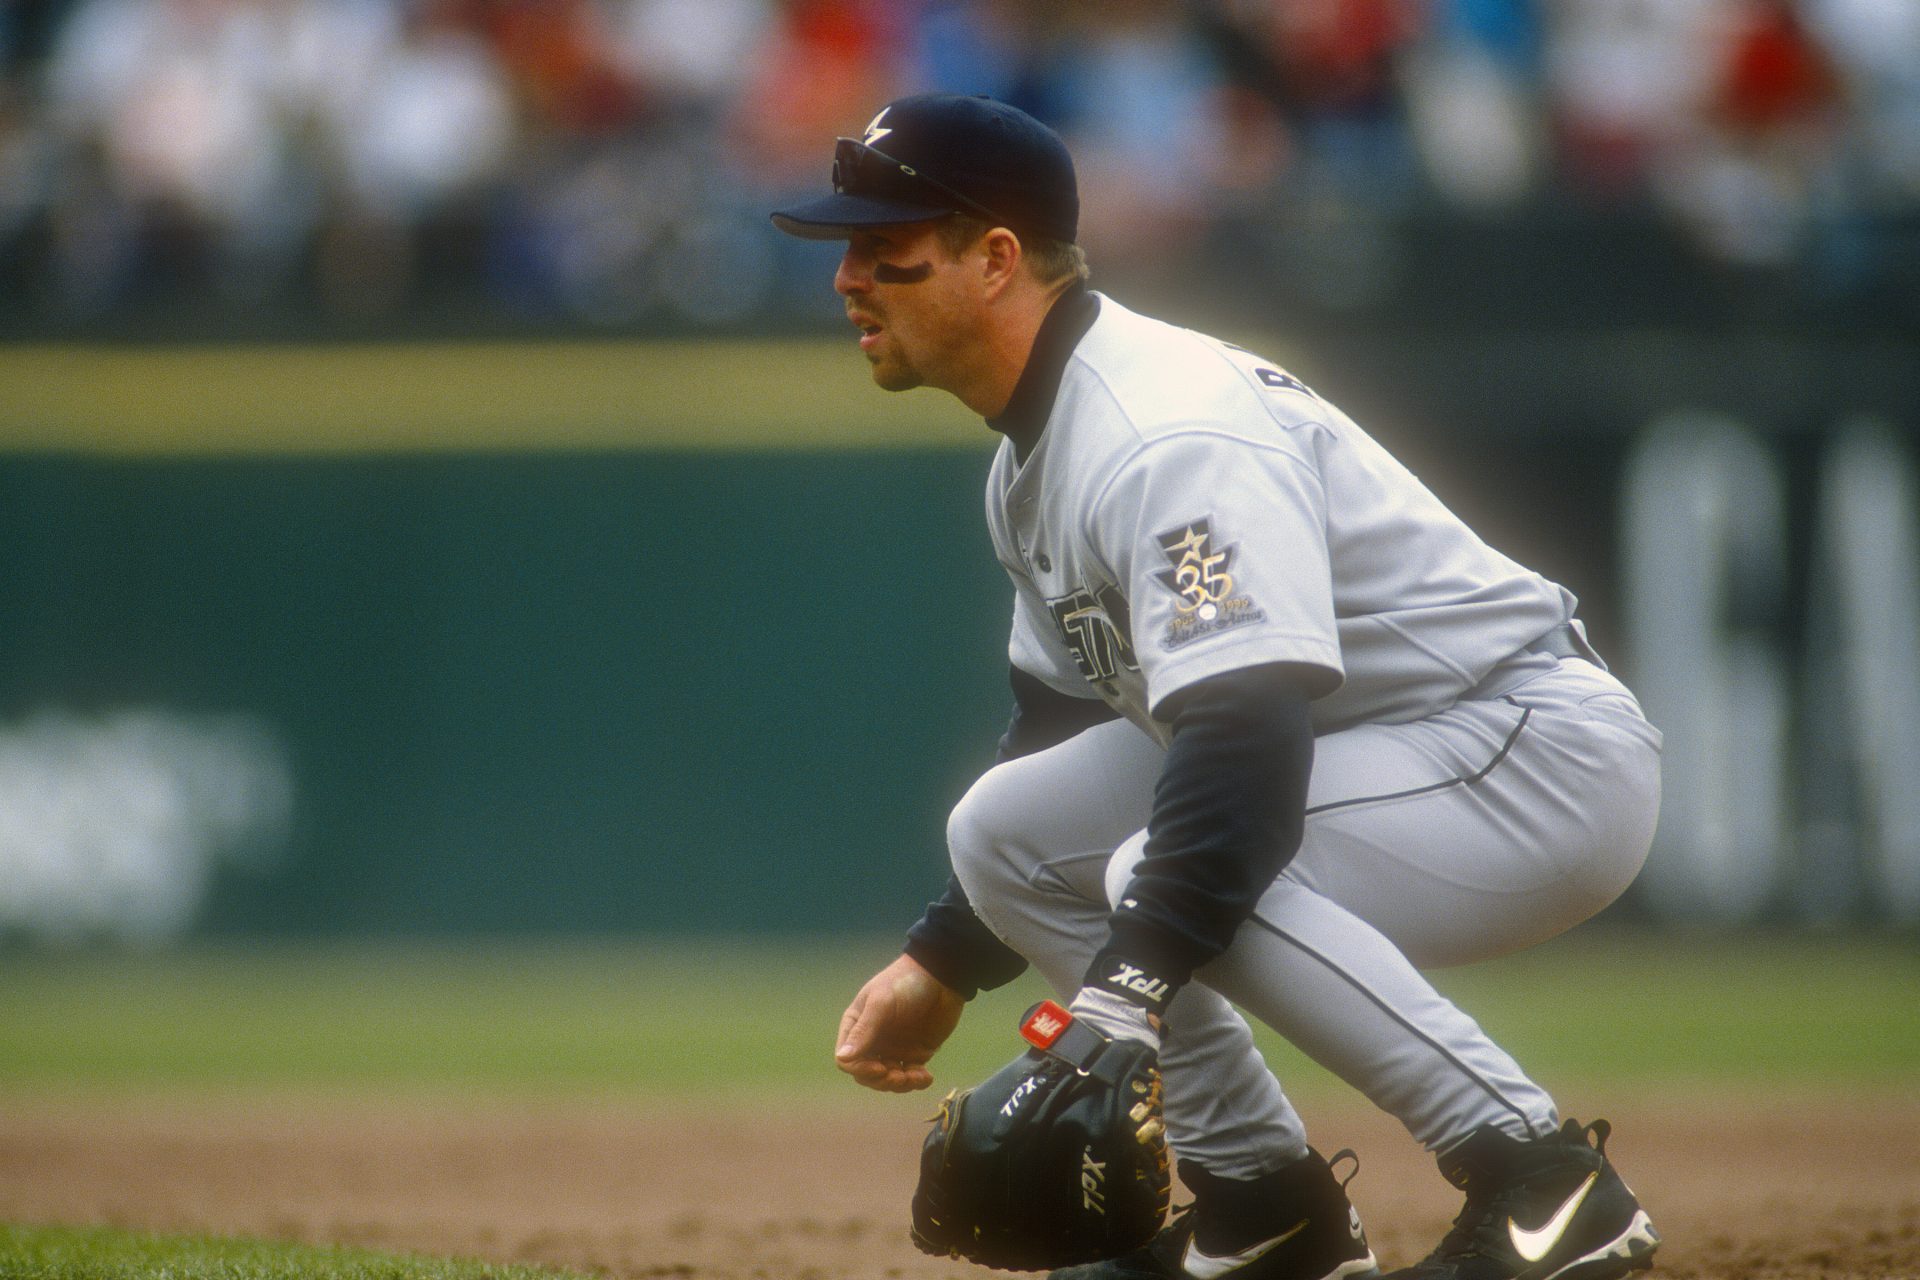 4 - 1990: Boston Red Sox trade Jeff Bagwell to the Houston Astros